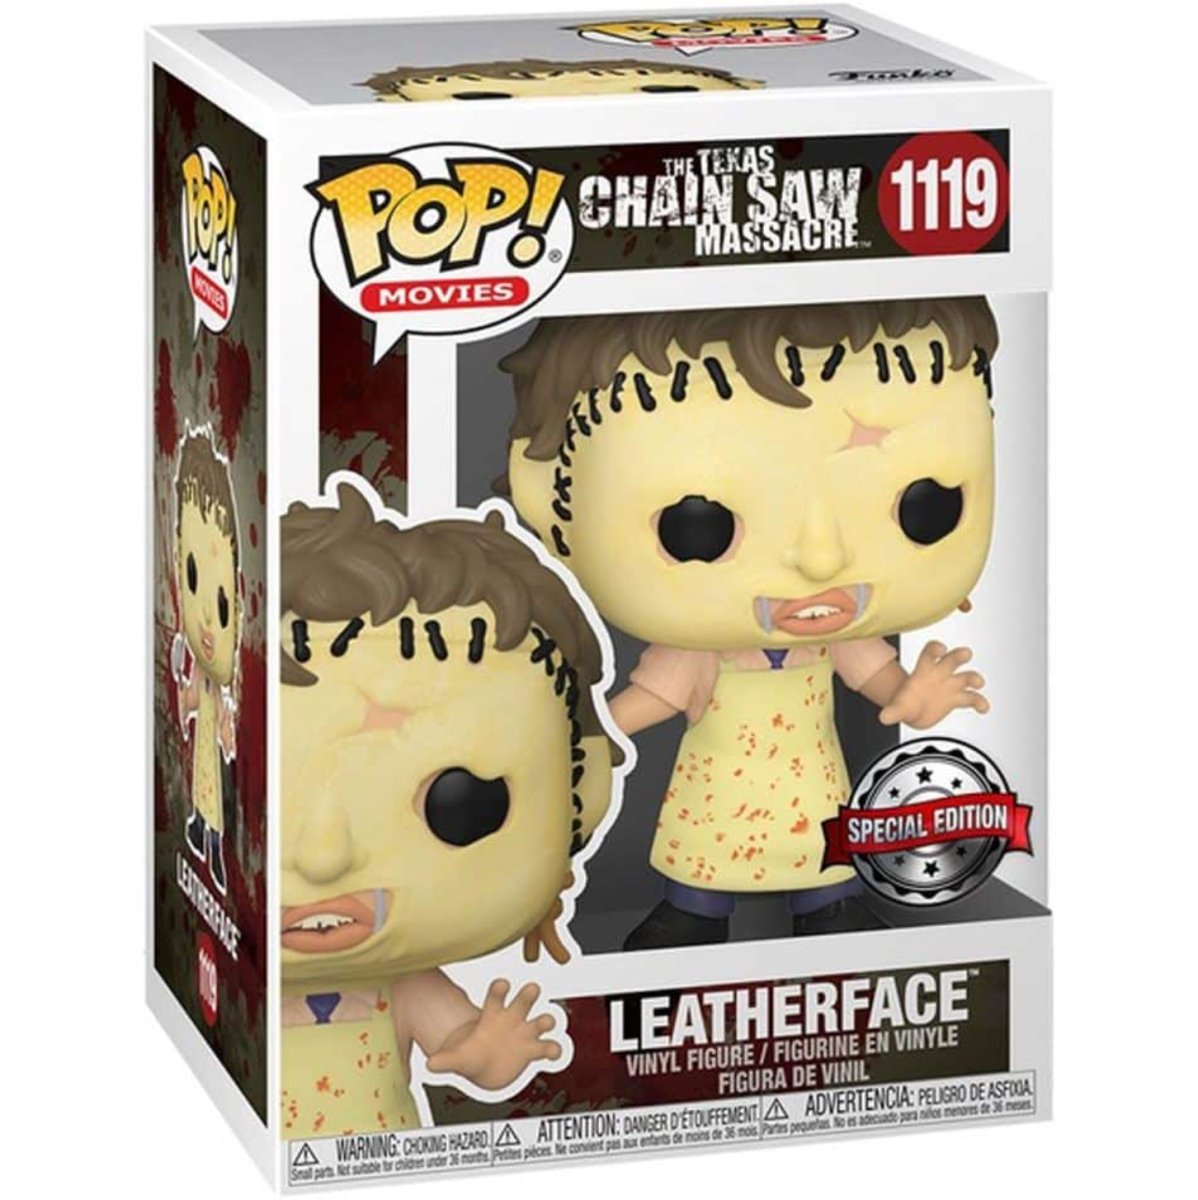 The Texas Chainsaw Massacre - Leatherface [with Hammer] (Special Edition) #1119 - Funko Pop! Vinyl Movies - Persona Toys